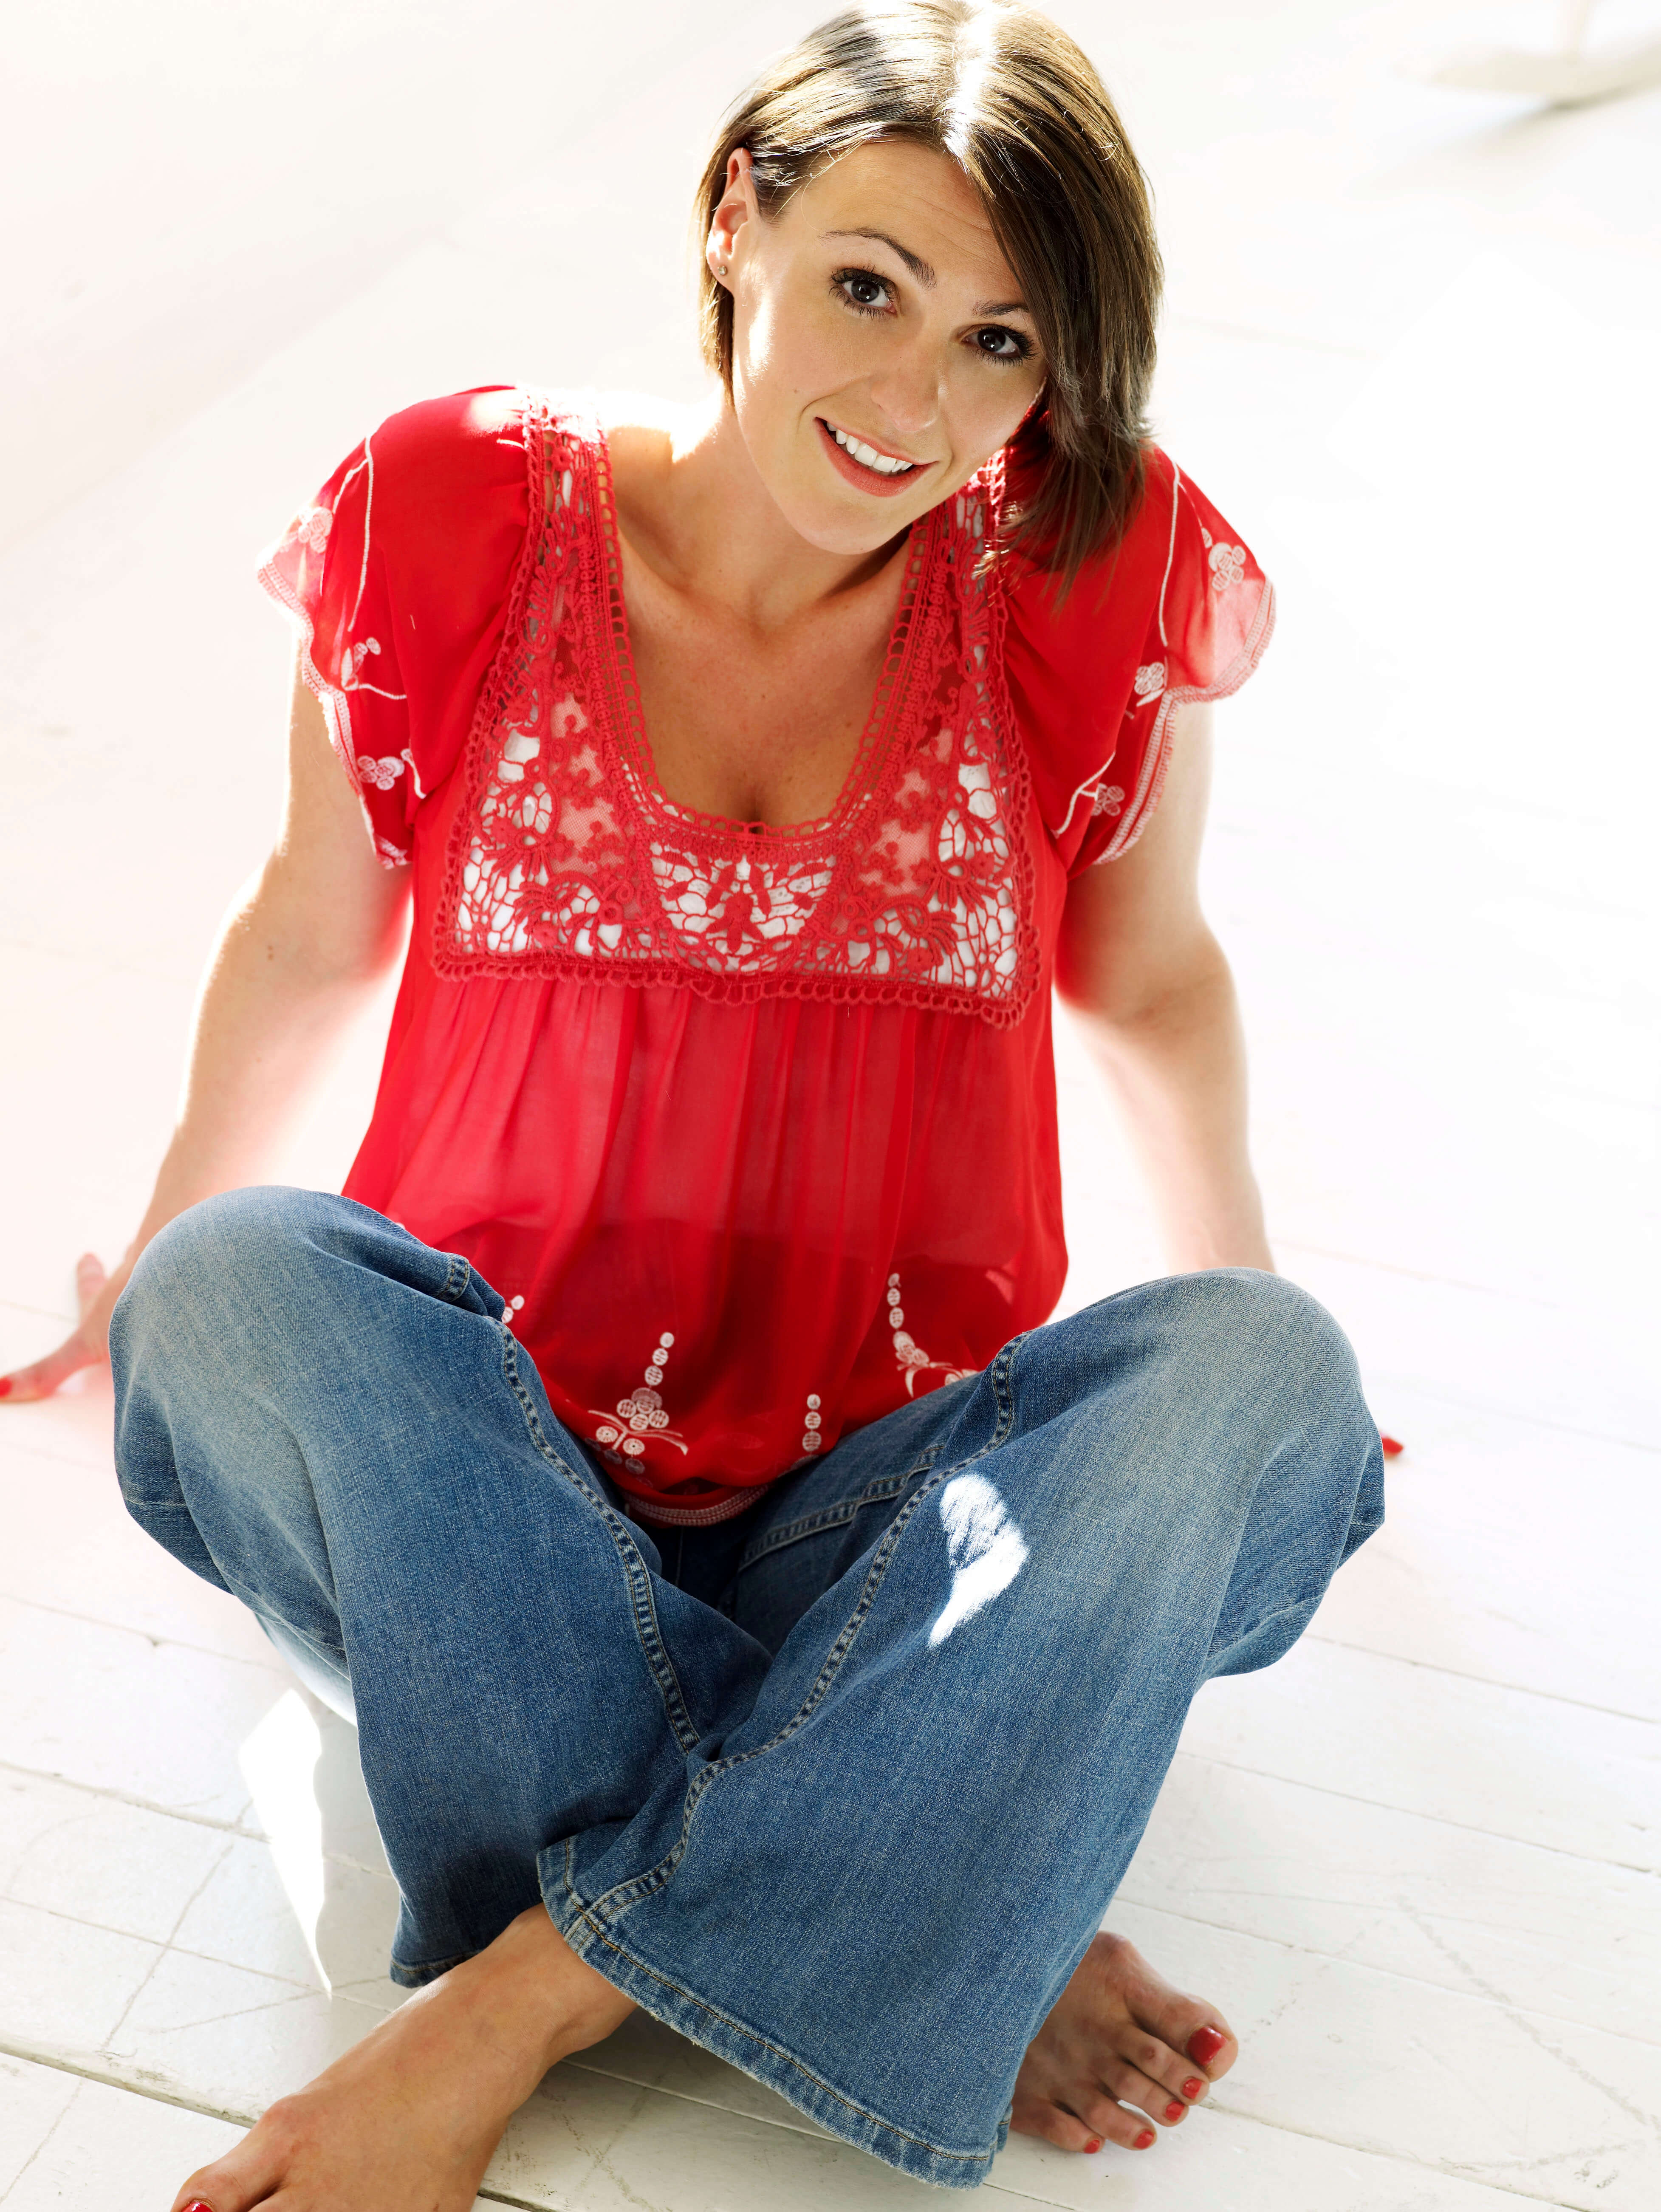 61 Sexiest Suranne Jones Boobs Pictures Will Tempt You